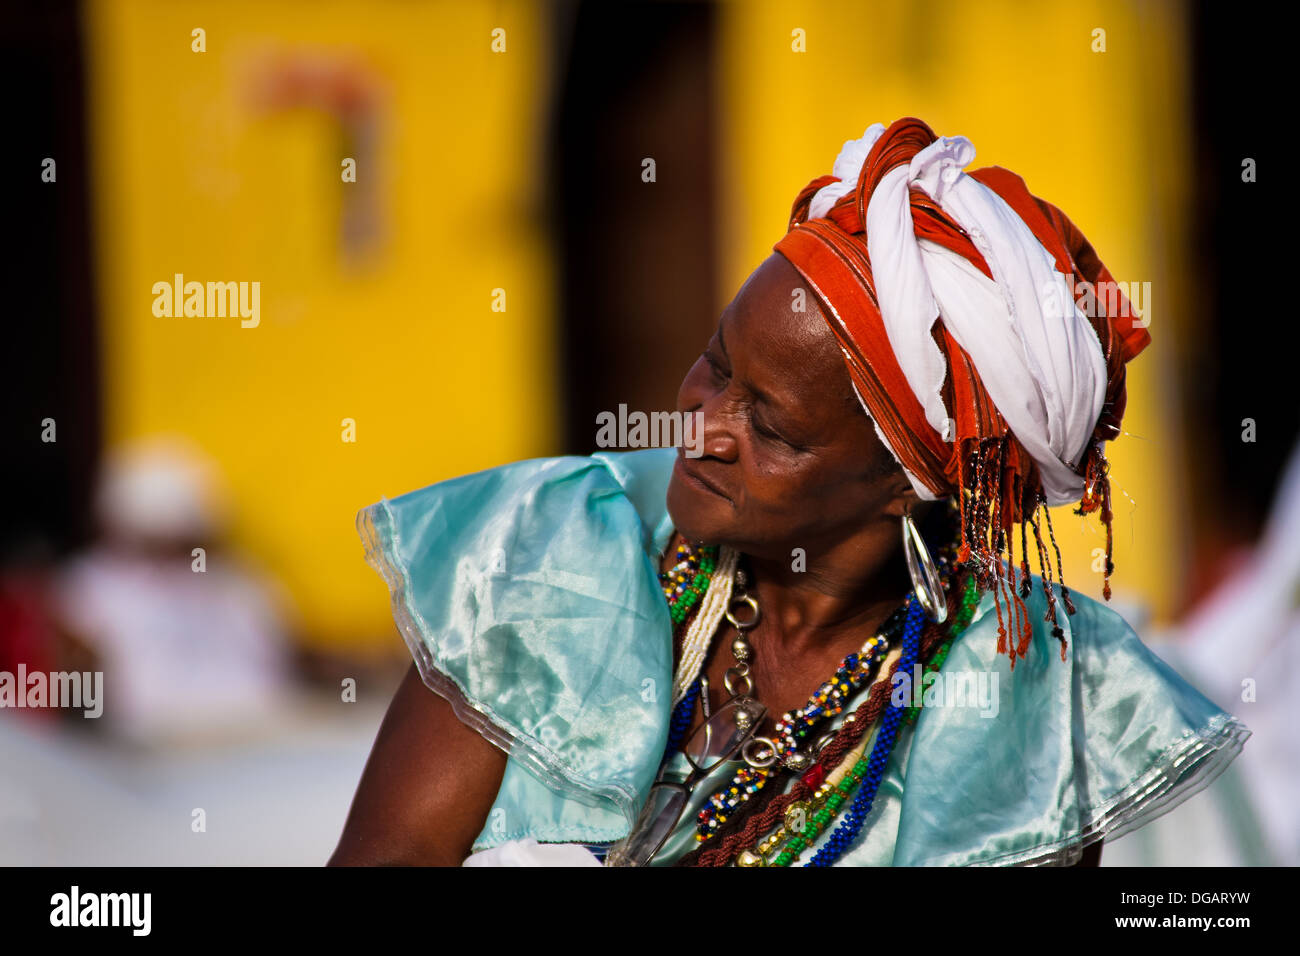 A Baiana woman seen in front of the St. Lazarus church in Salvador, Bahia, Brazil. Stock Photo